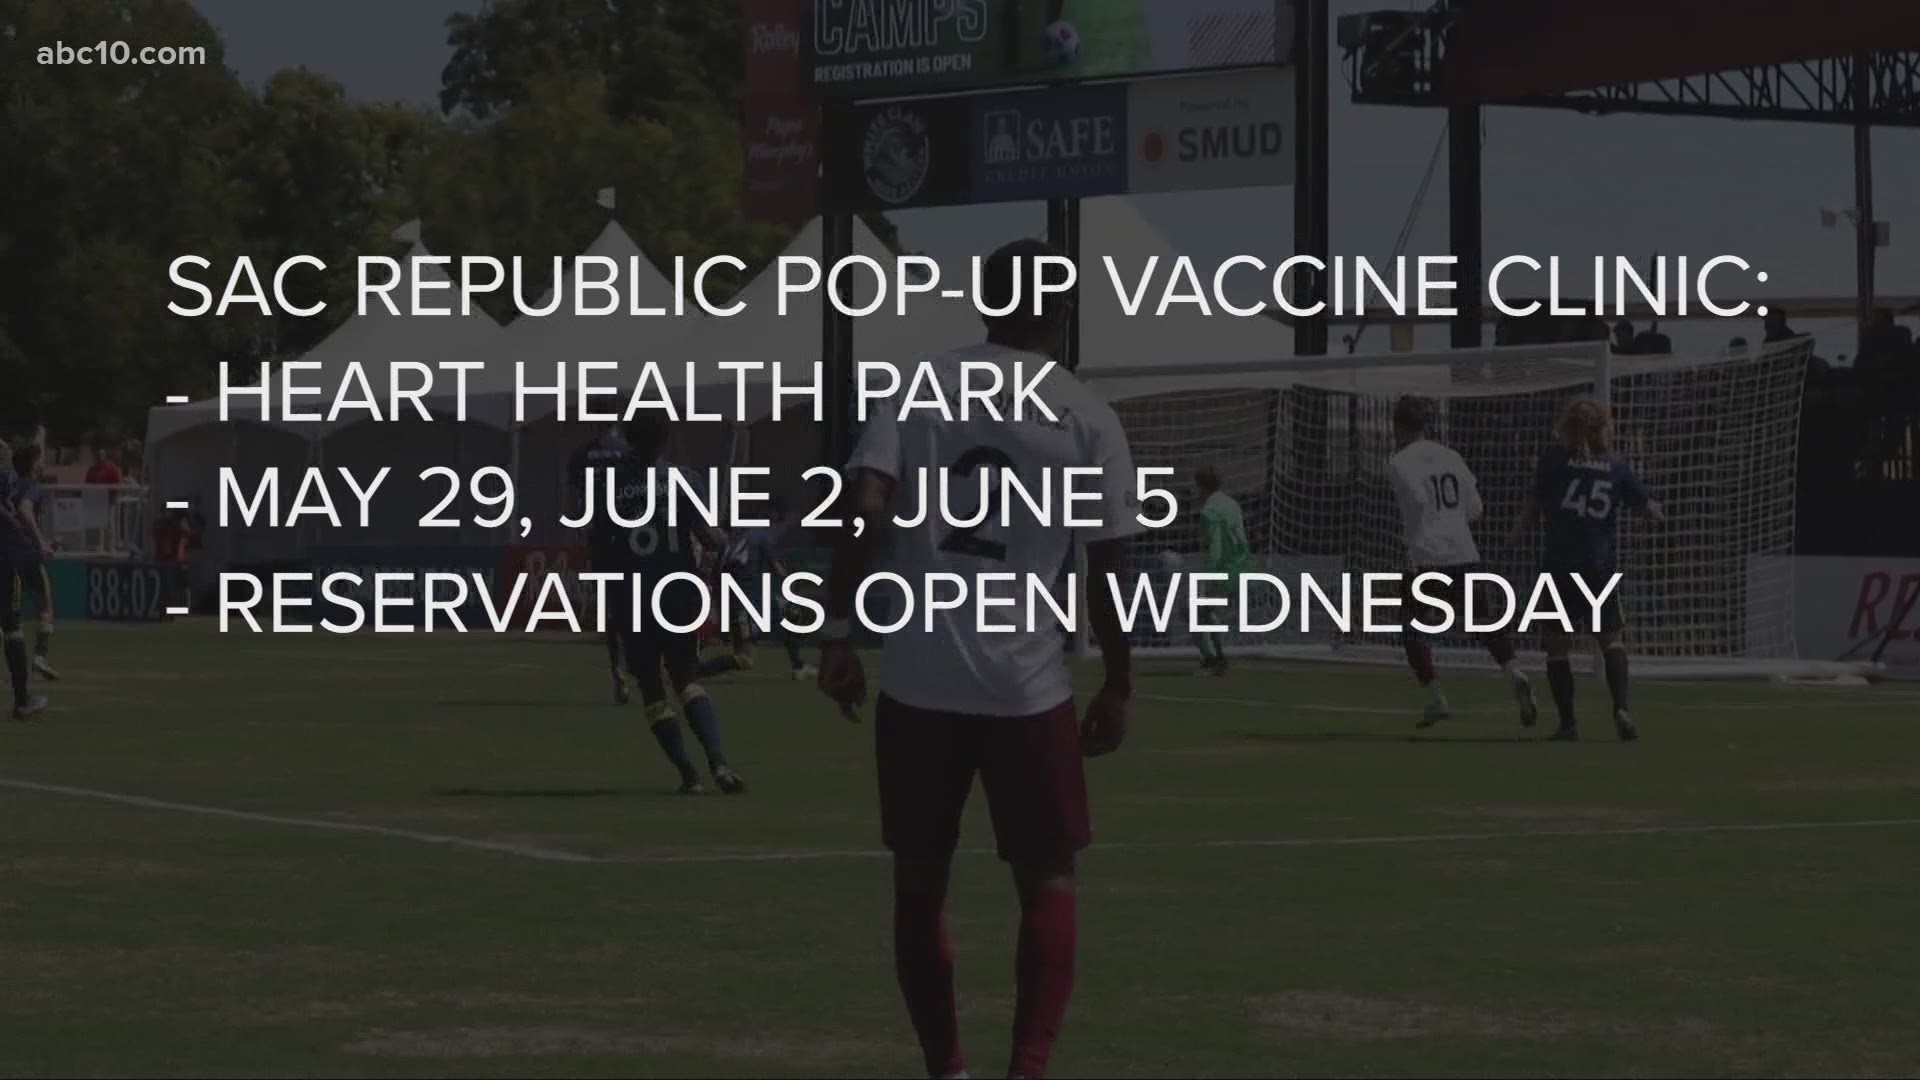 Republic FC season ticket members get first dibs on Tuesday, but the promotion extends to the public on Wednesday.